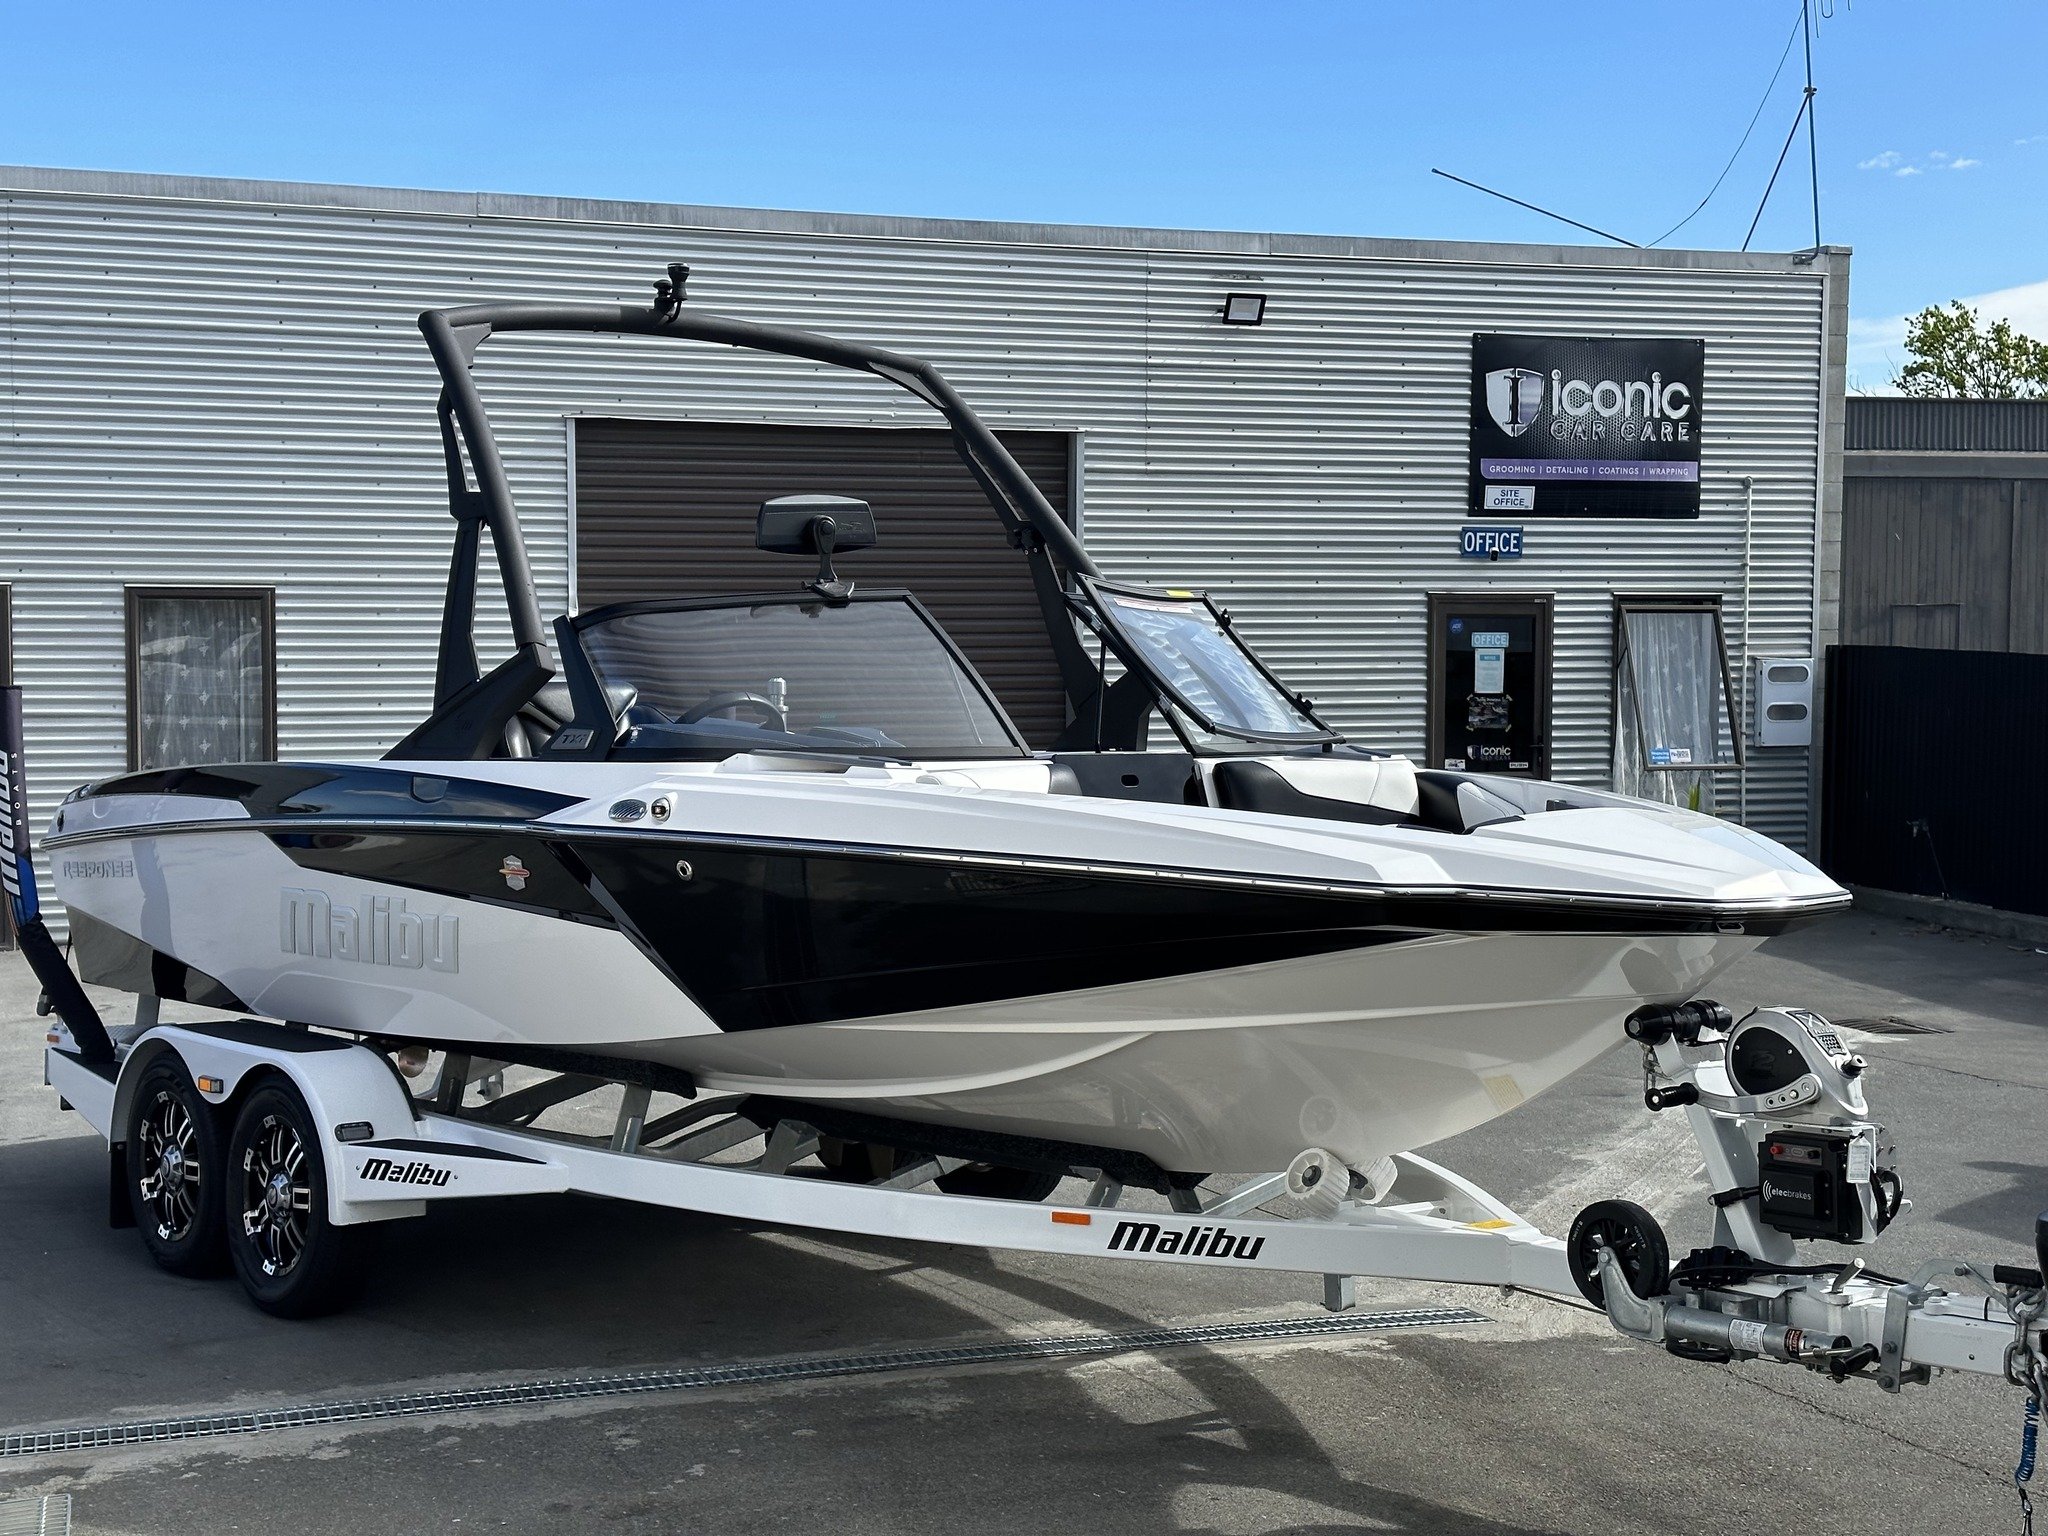 Don't just make waves; make them jealous. Get your boat detailed at Iconic Car Care.🛥

🛡Iconic, Your Premium Partner in Car Care
📞027 333 3687📞
📧welcome@iconiccarcare.co.nz📧
🏠142 Dobson Street, Ashburton🏠
🌐https://iconiccarcare.co.nz/🌐